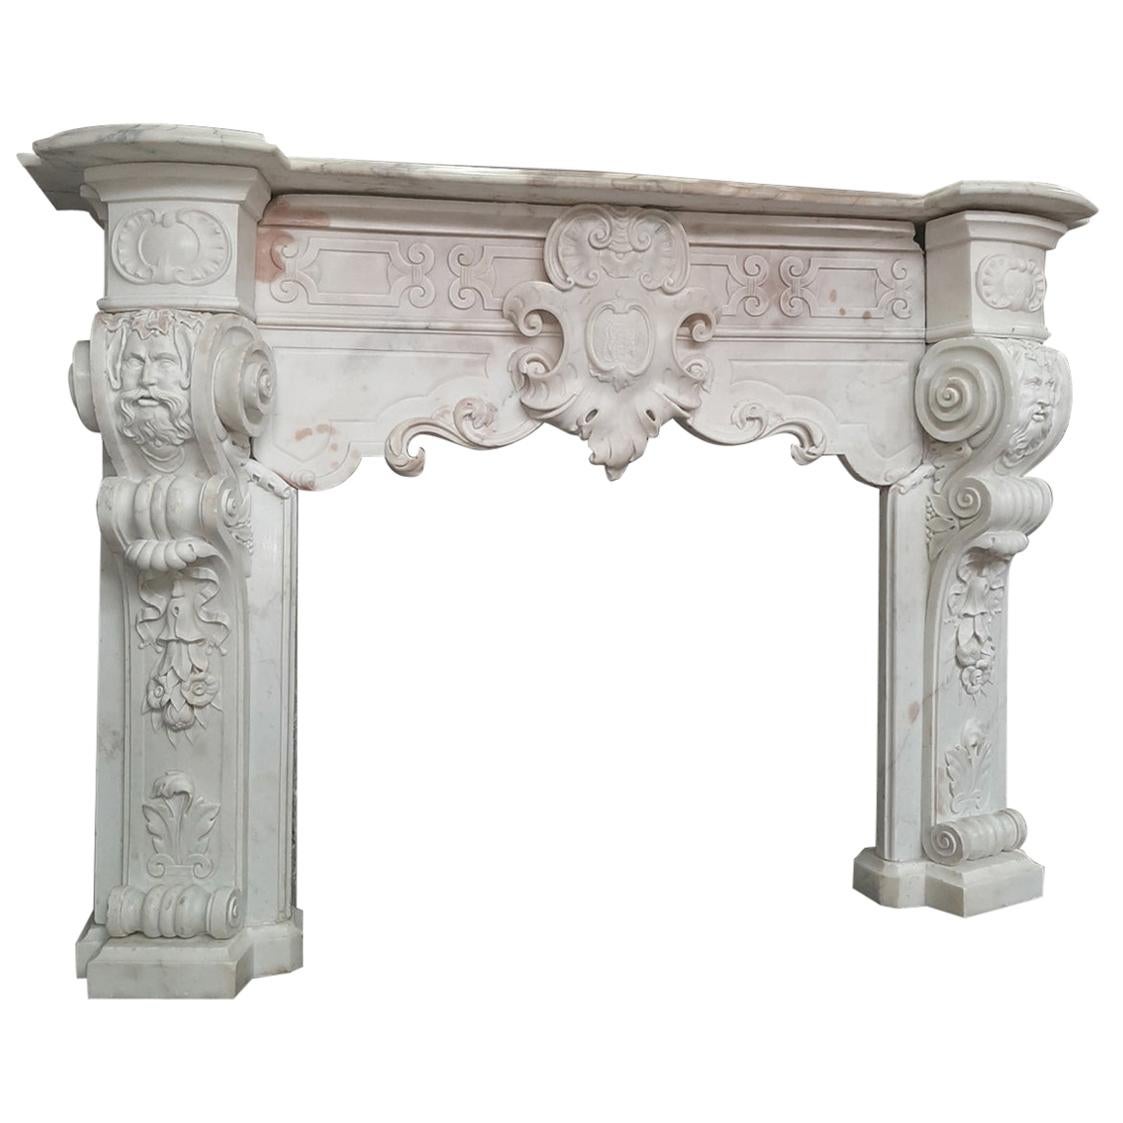 Italian 18th Century Carrara Marble Fireplace Richly Decorated Baroque Style